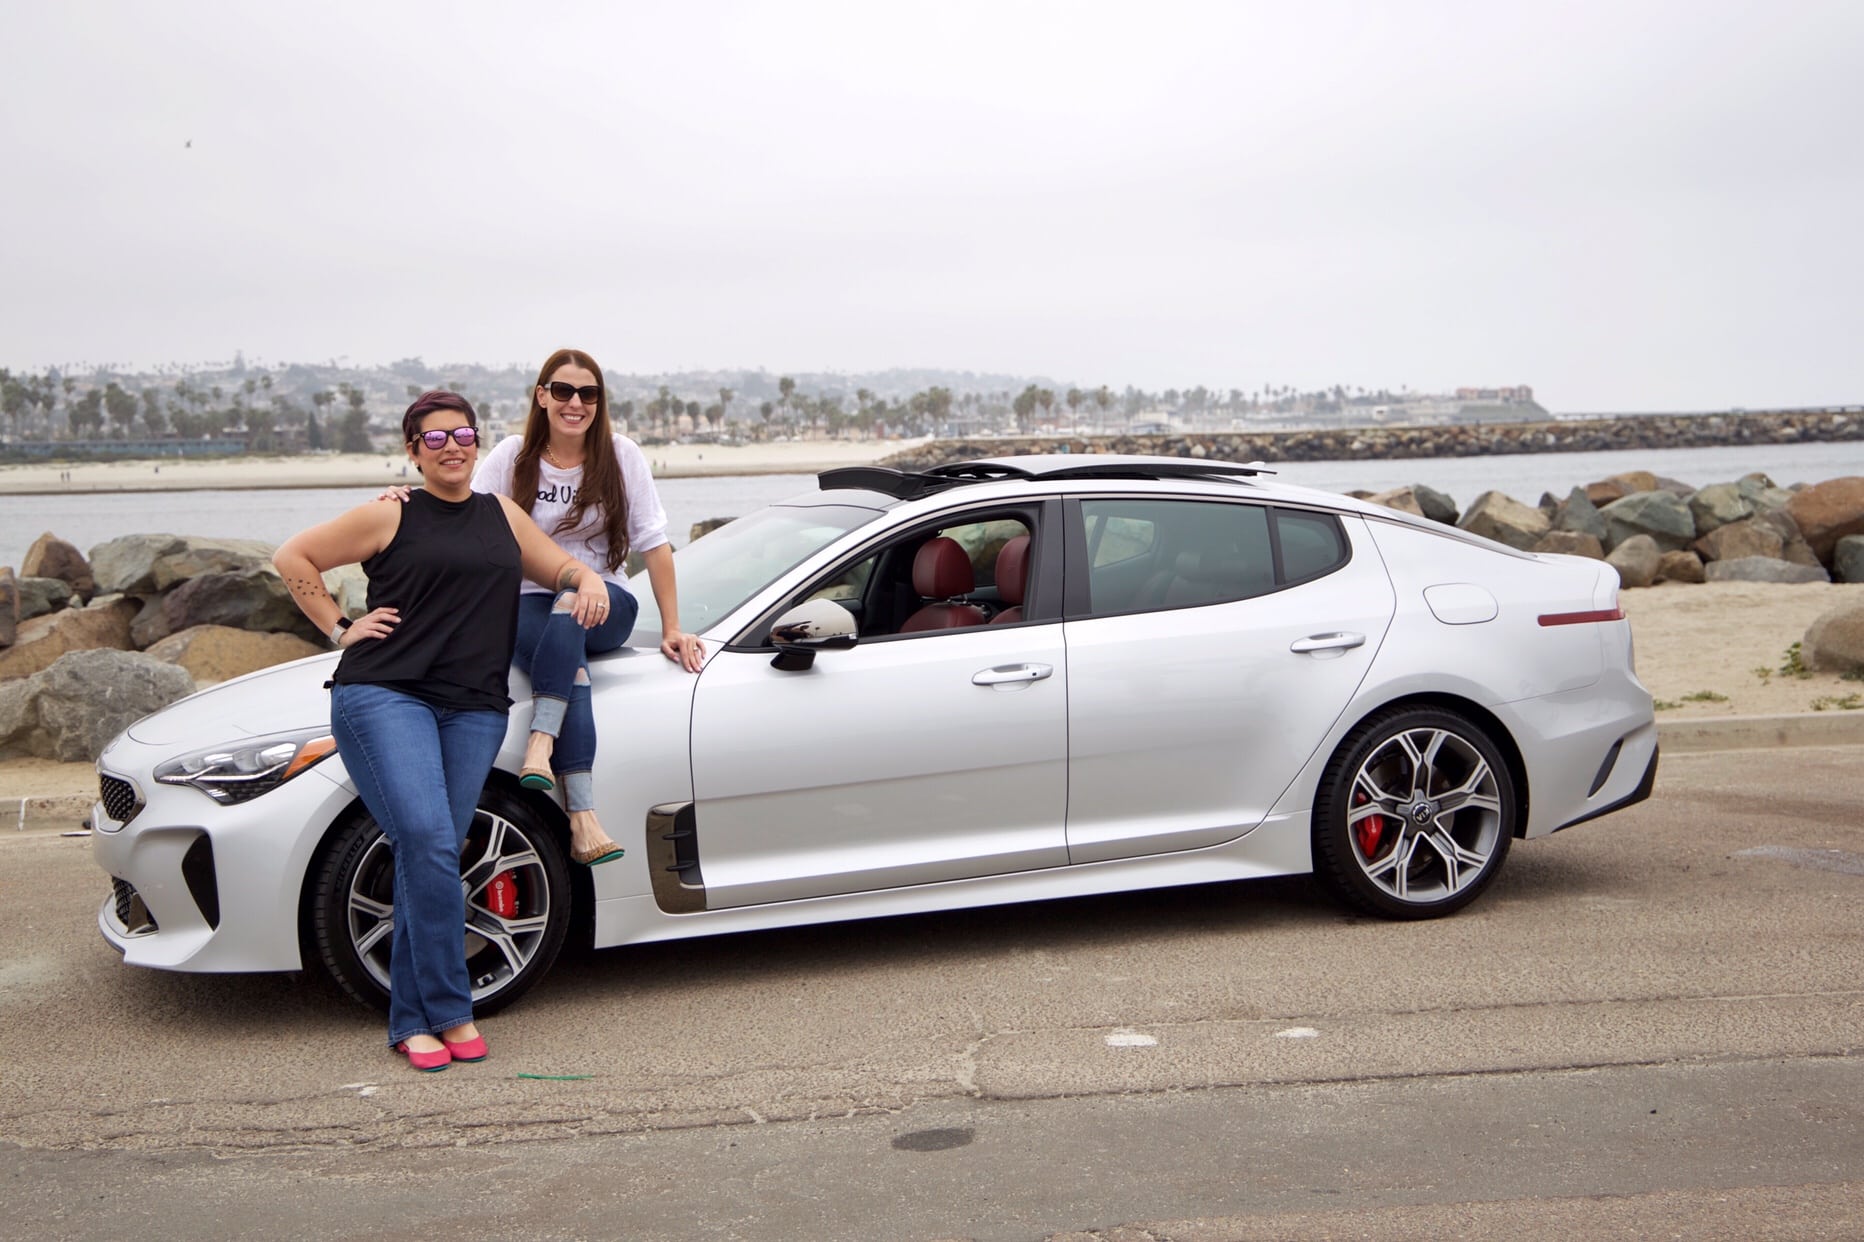 Friends and Kia in San Diego